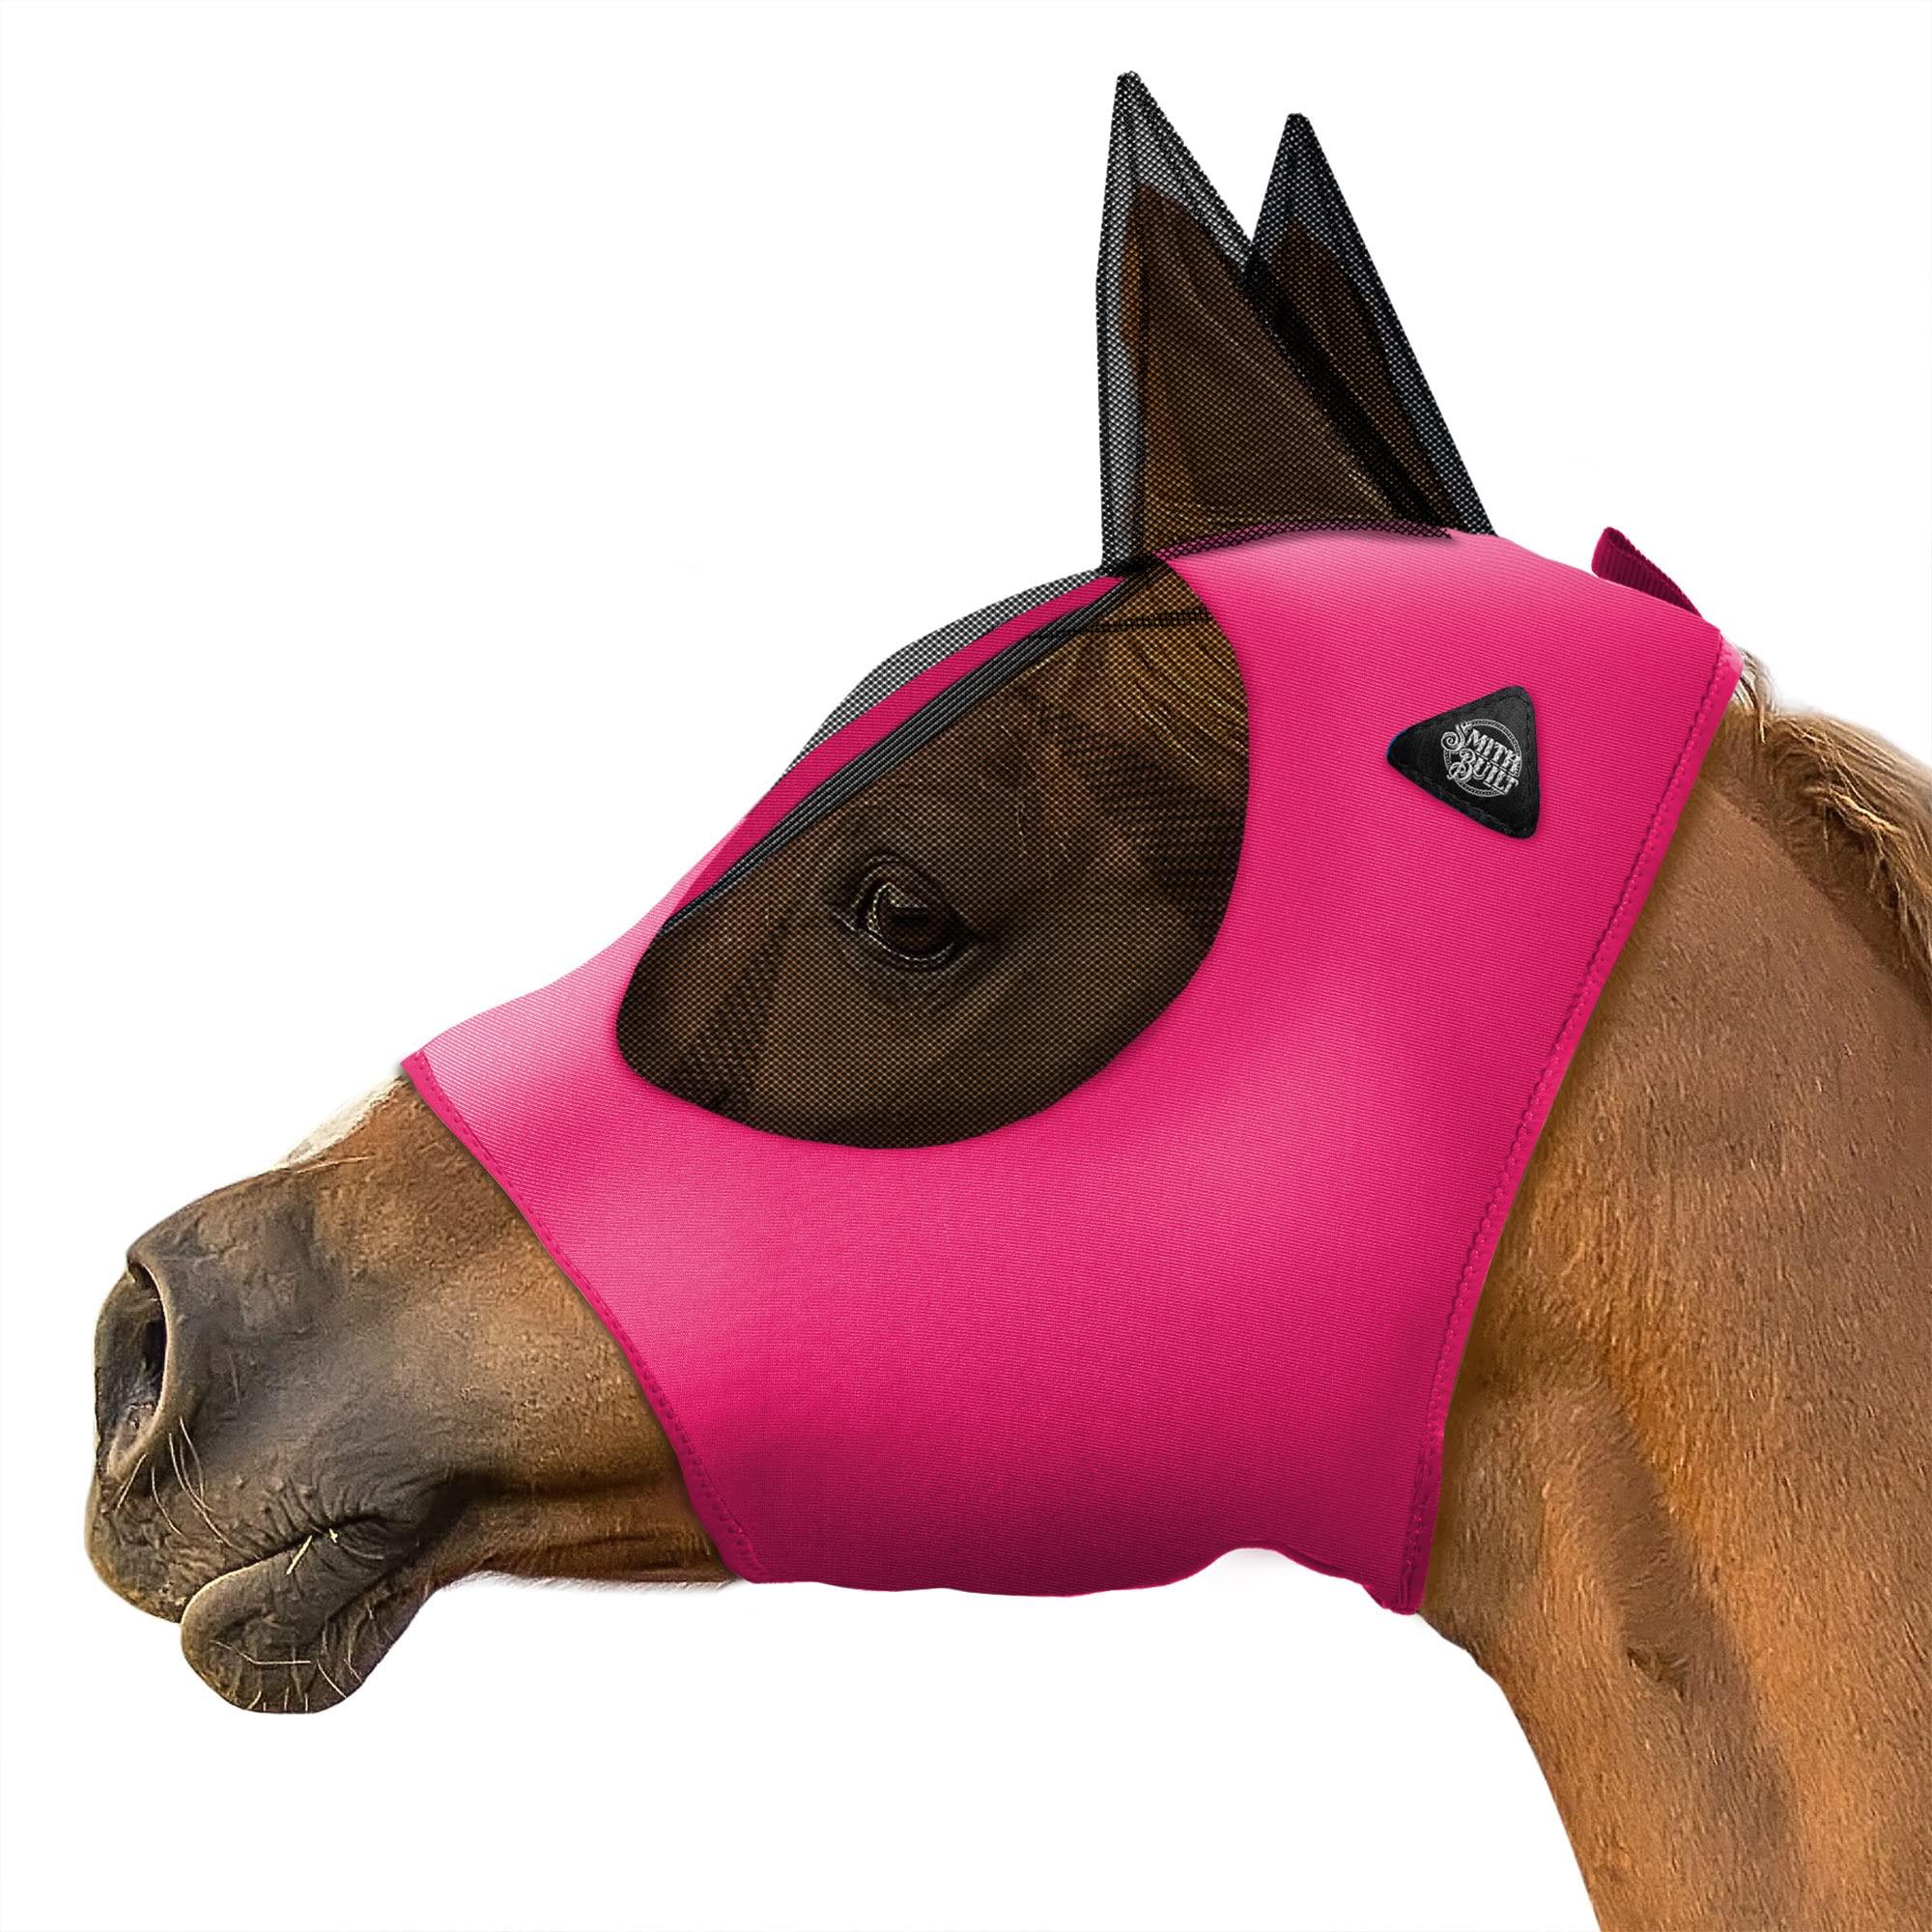 SmithBuilt Horse Fly Mask (Pink, Horse) - Mesh Eyes and Ears, Breathable Fabric, UV Protection